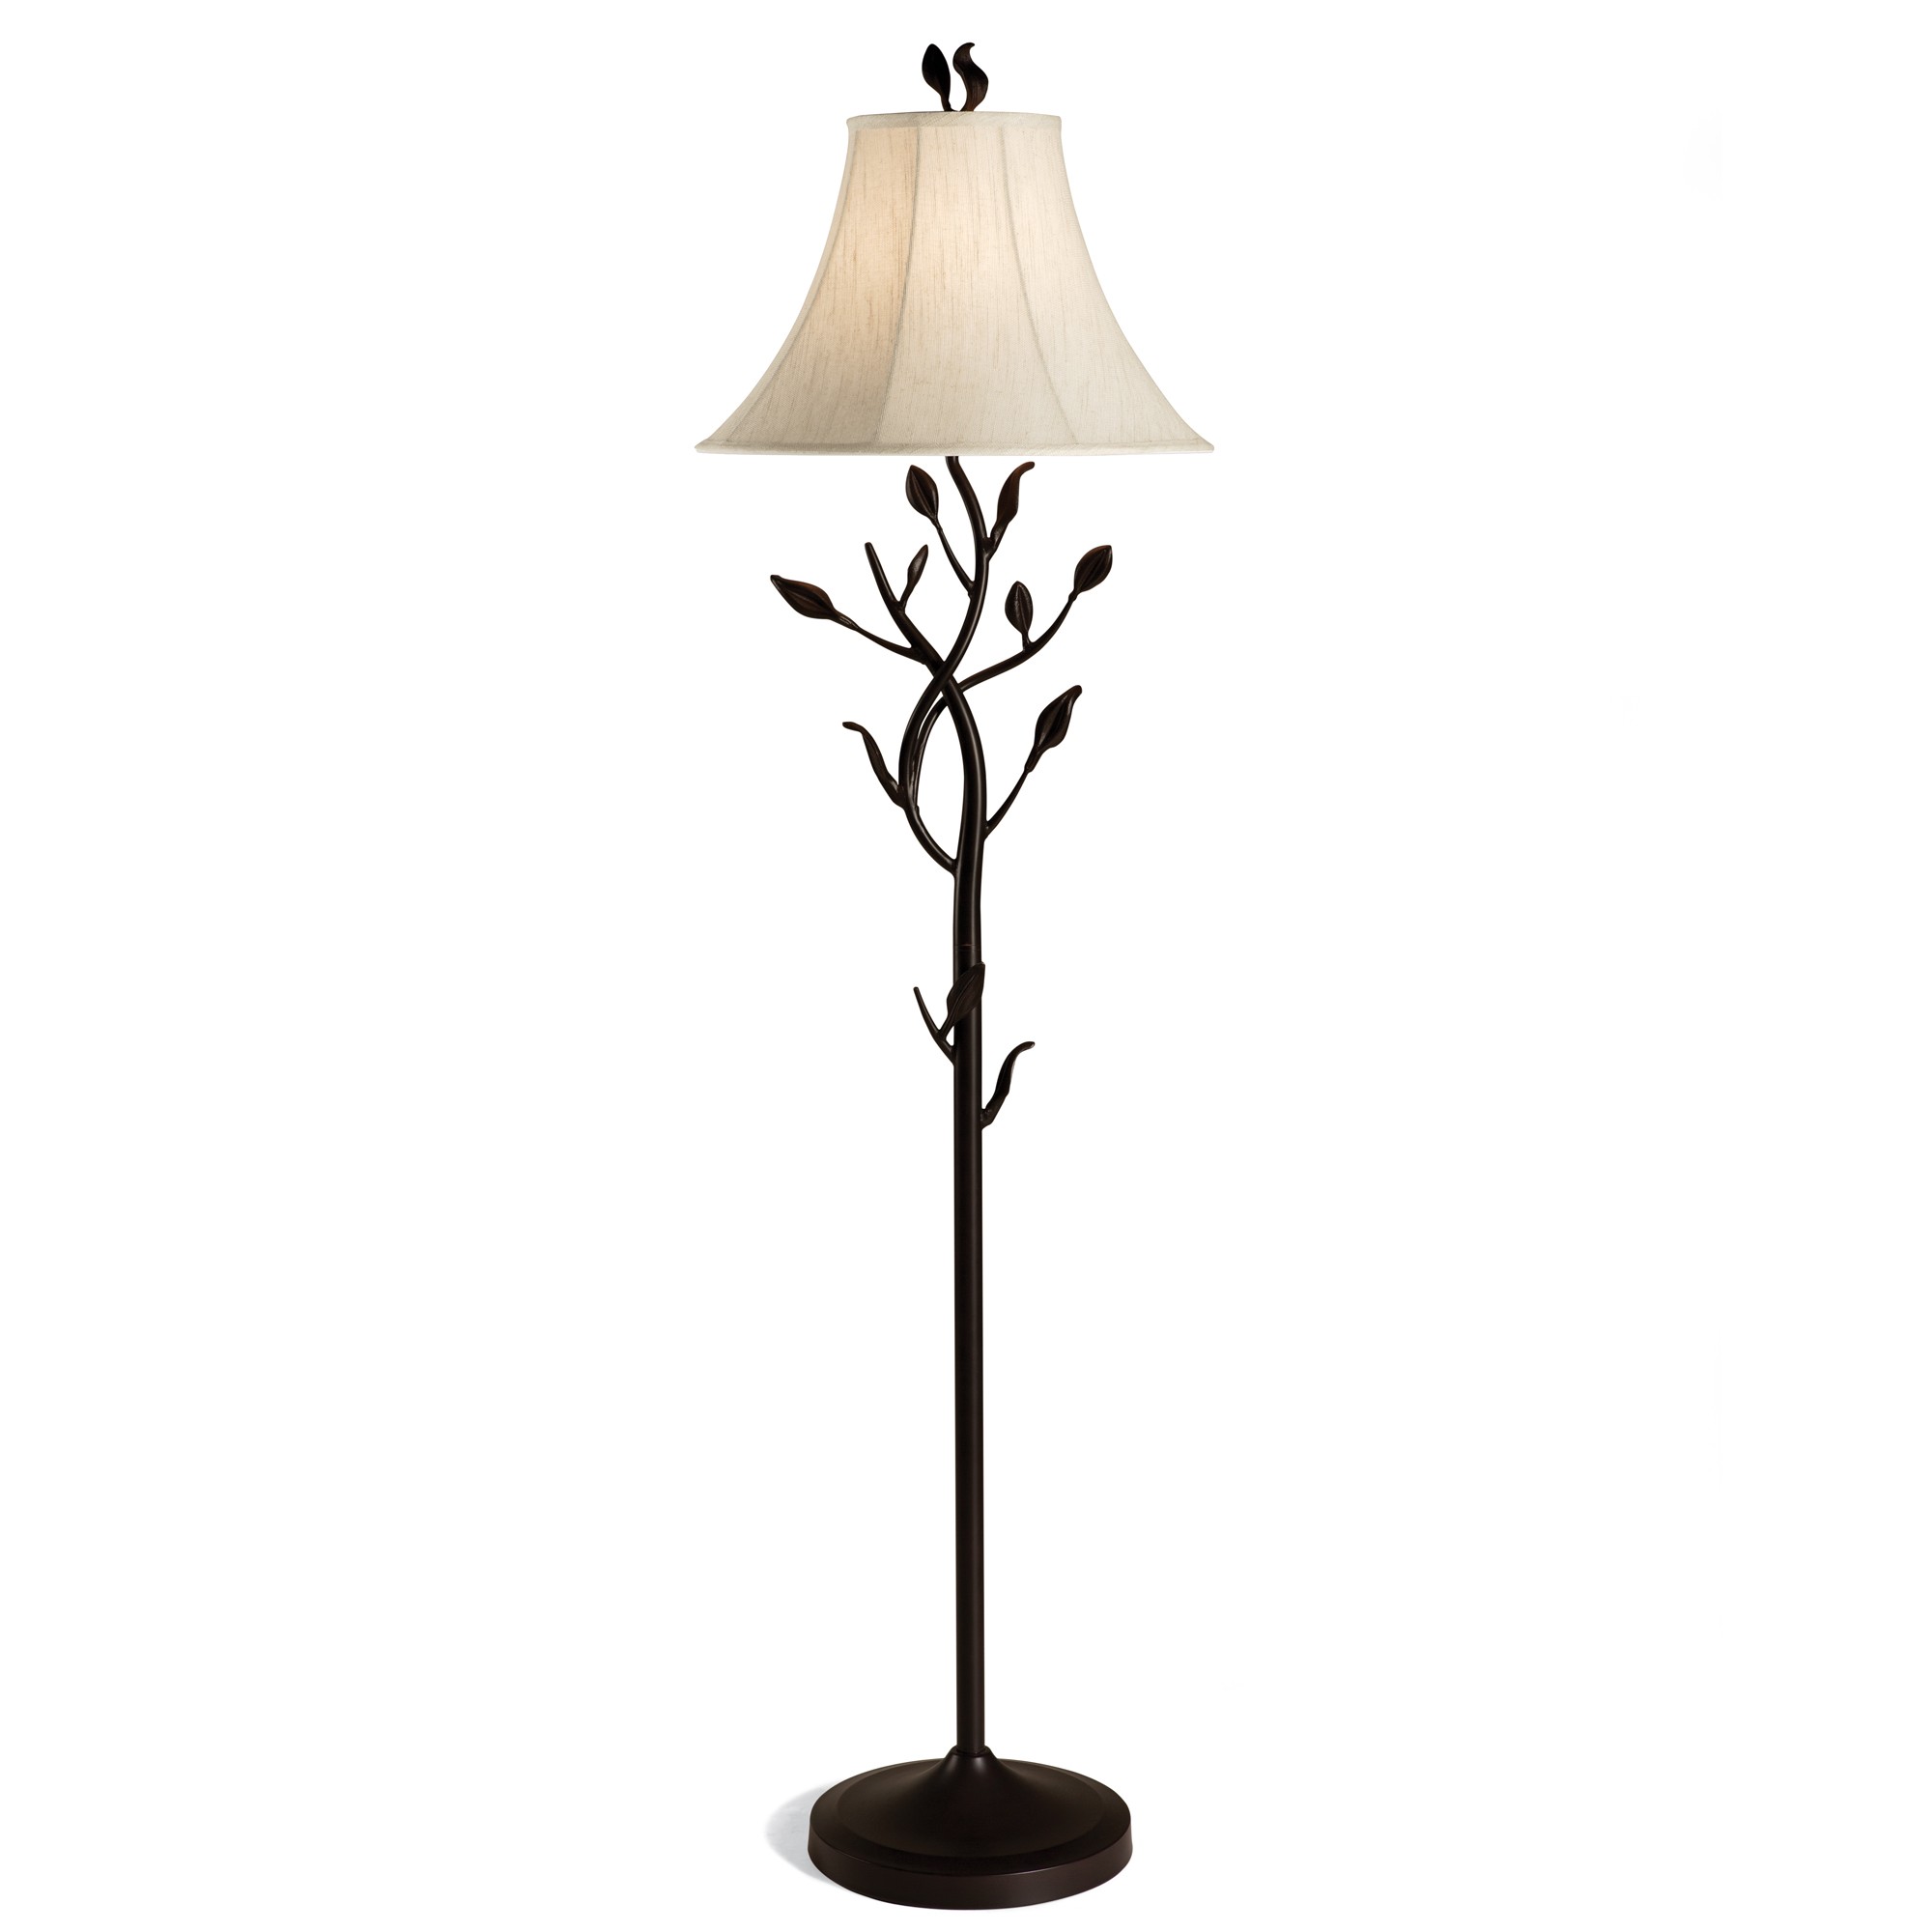 tree like decorative lighting wrought iron floor lamp sturbridge accent table lamps yankee work rustic glass coffee pottery barn top best drum throne resin wicker end small metal